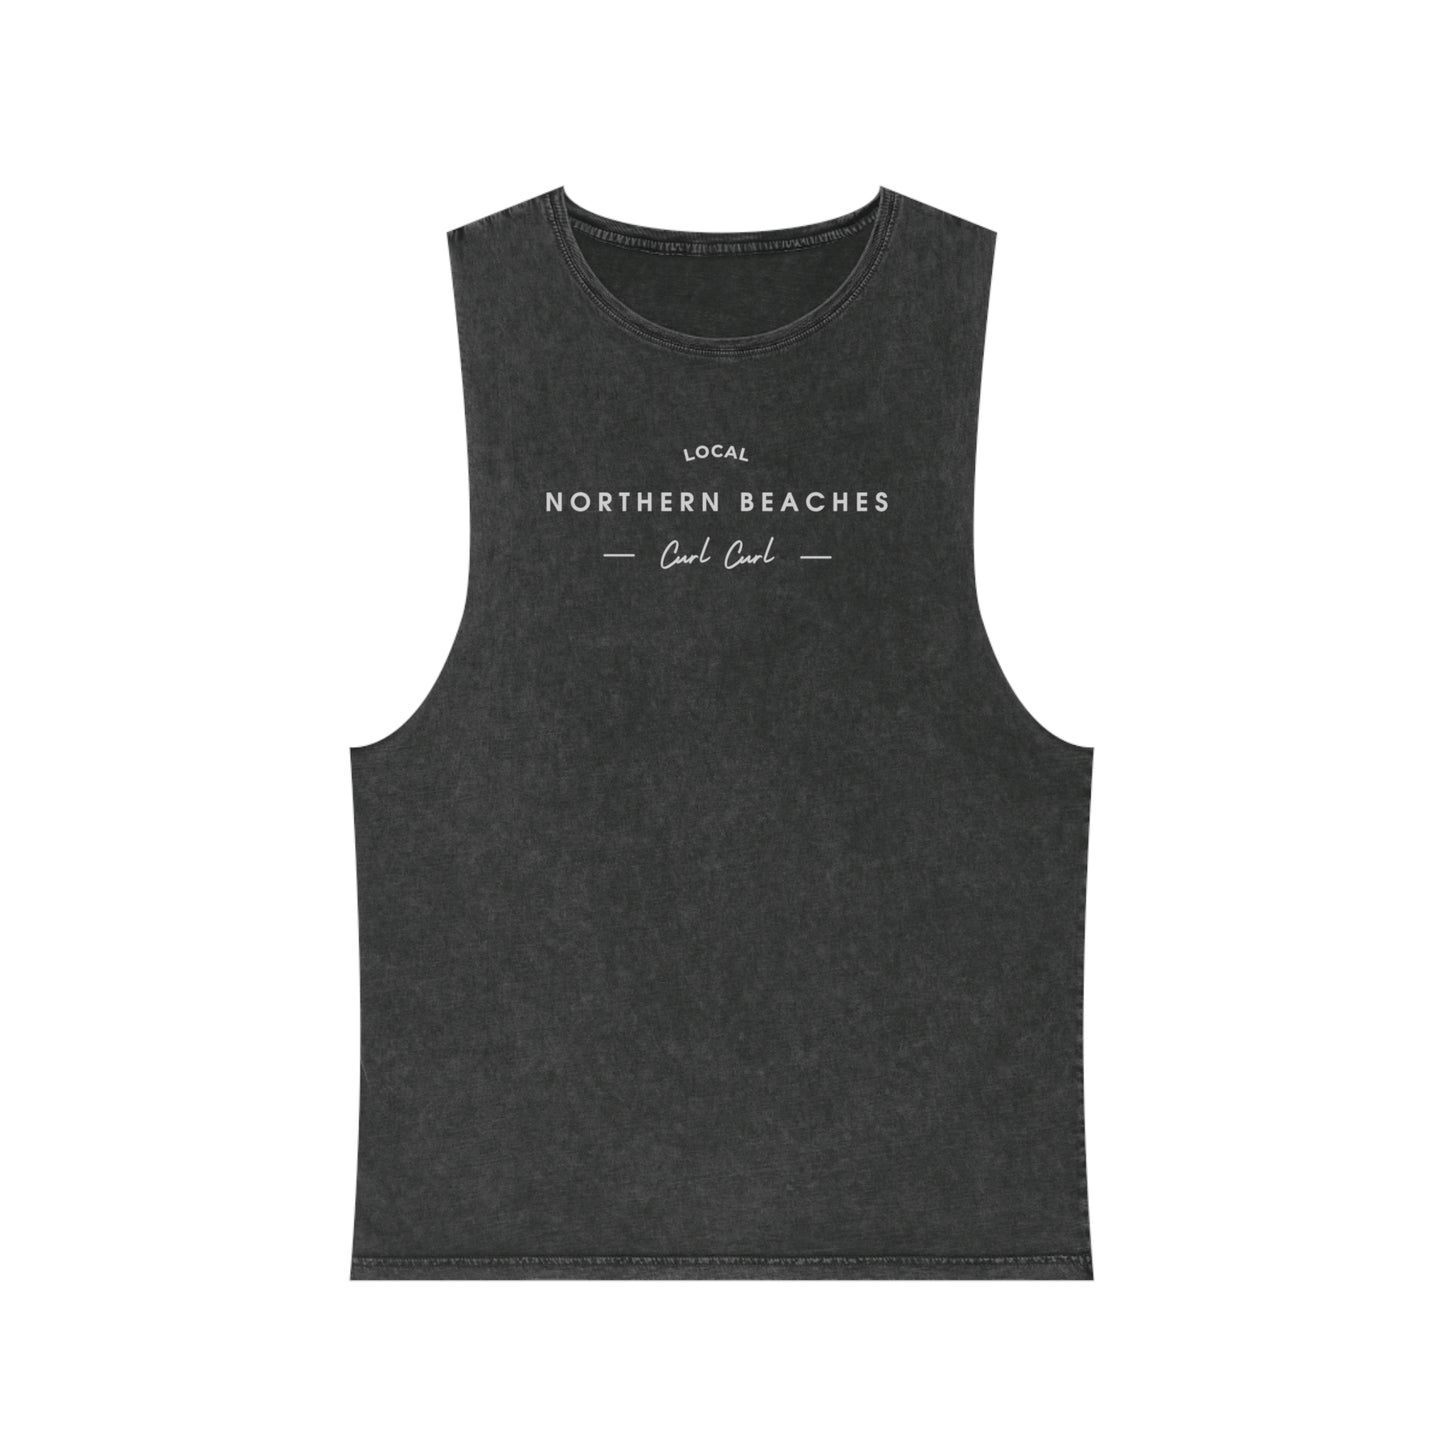 Stonewash Tank Top with Northern Beaches Curl Curl logo